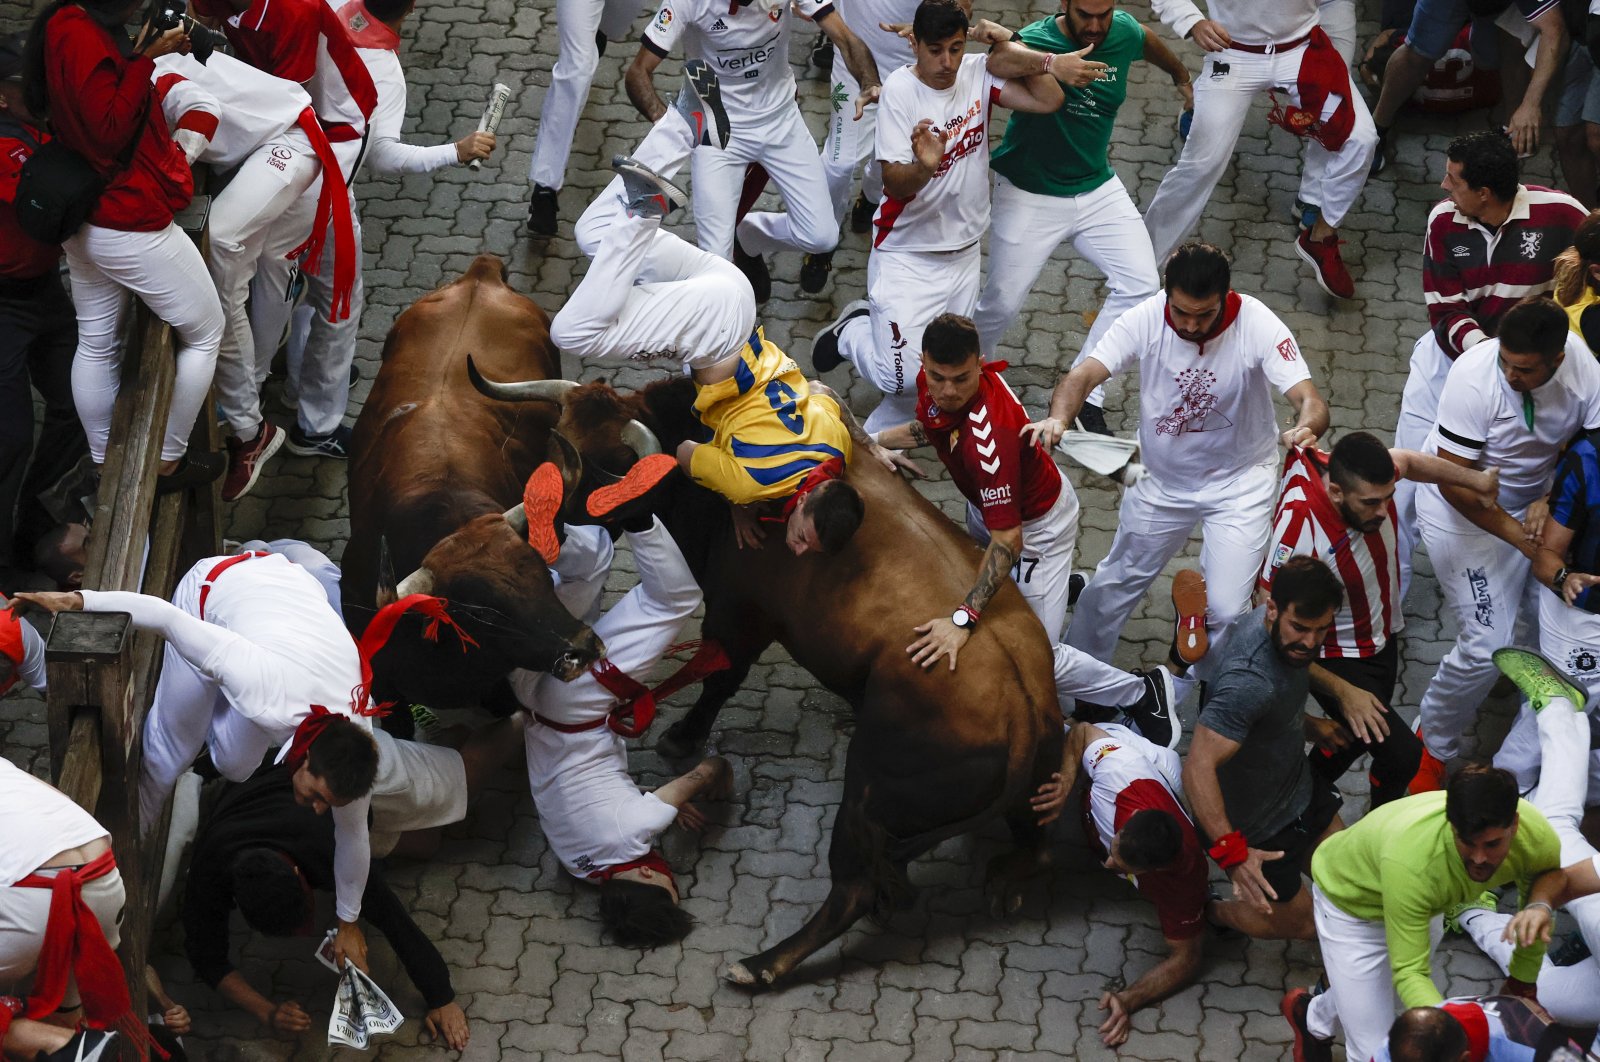 Participants tussle with bulls during the San Fermin Festival in Pamplona, Navarra, Spain, July 11, 2022. (EPA Photo)